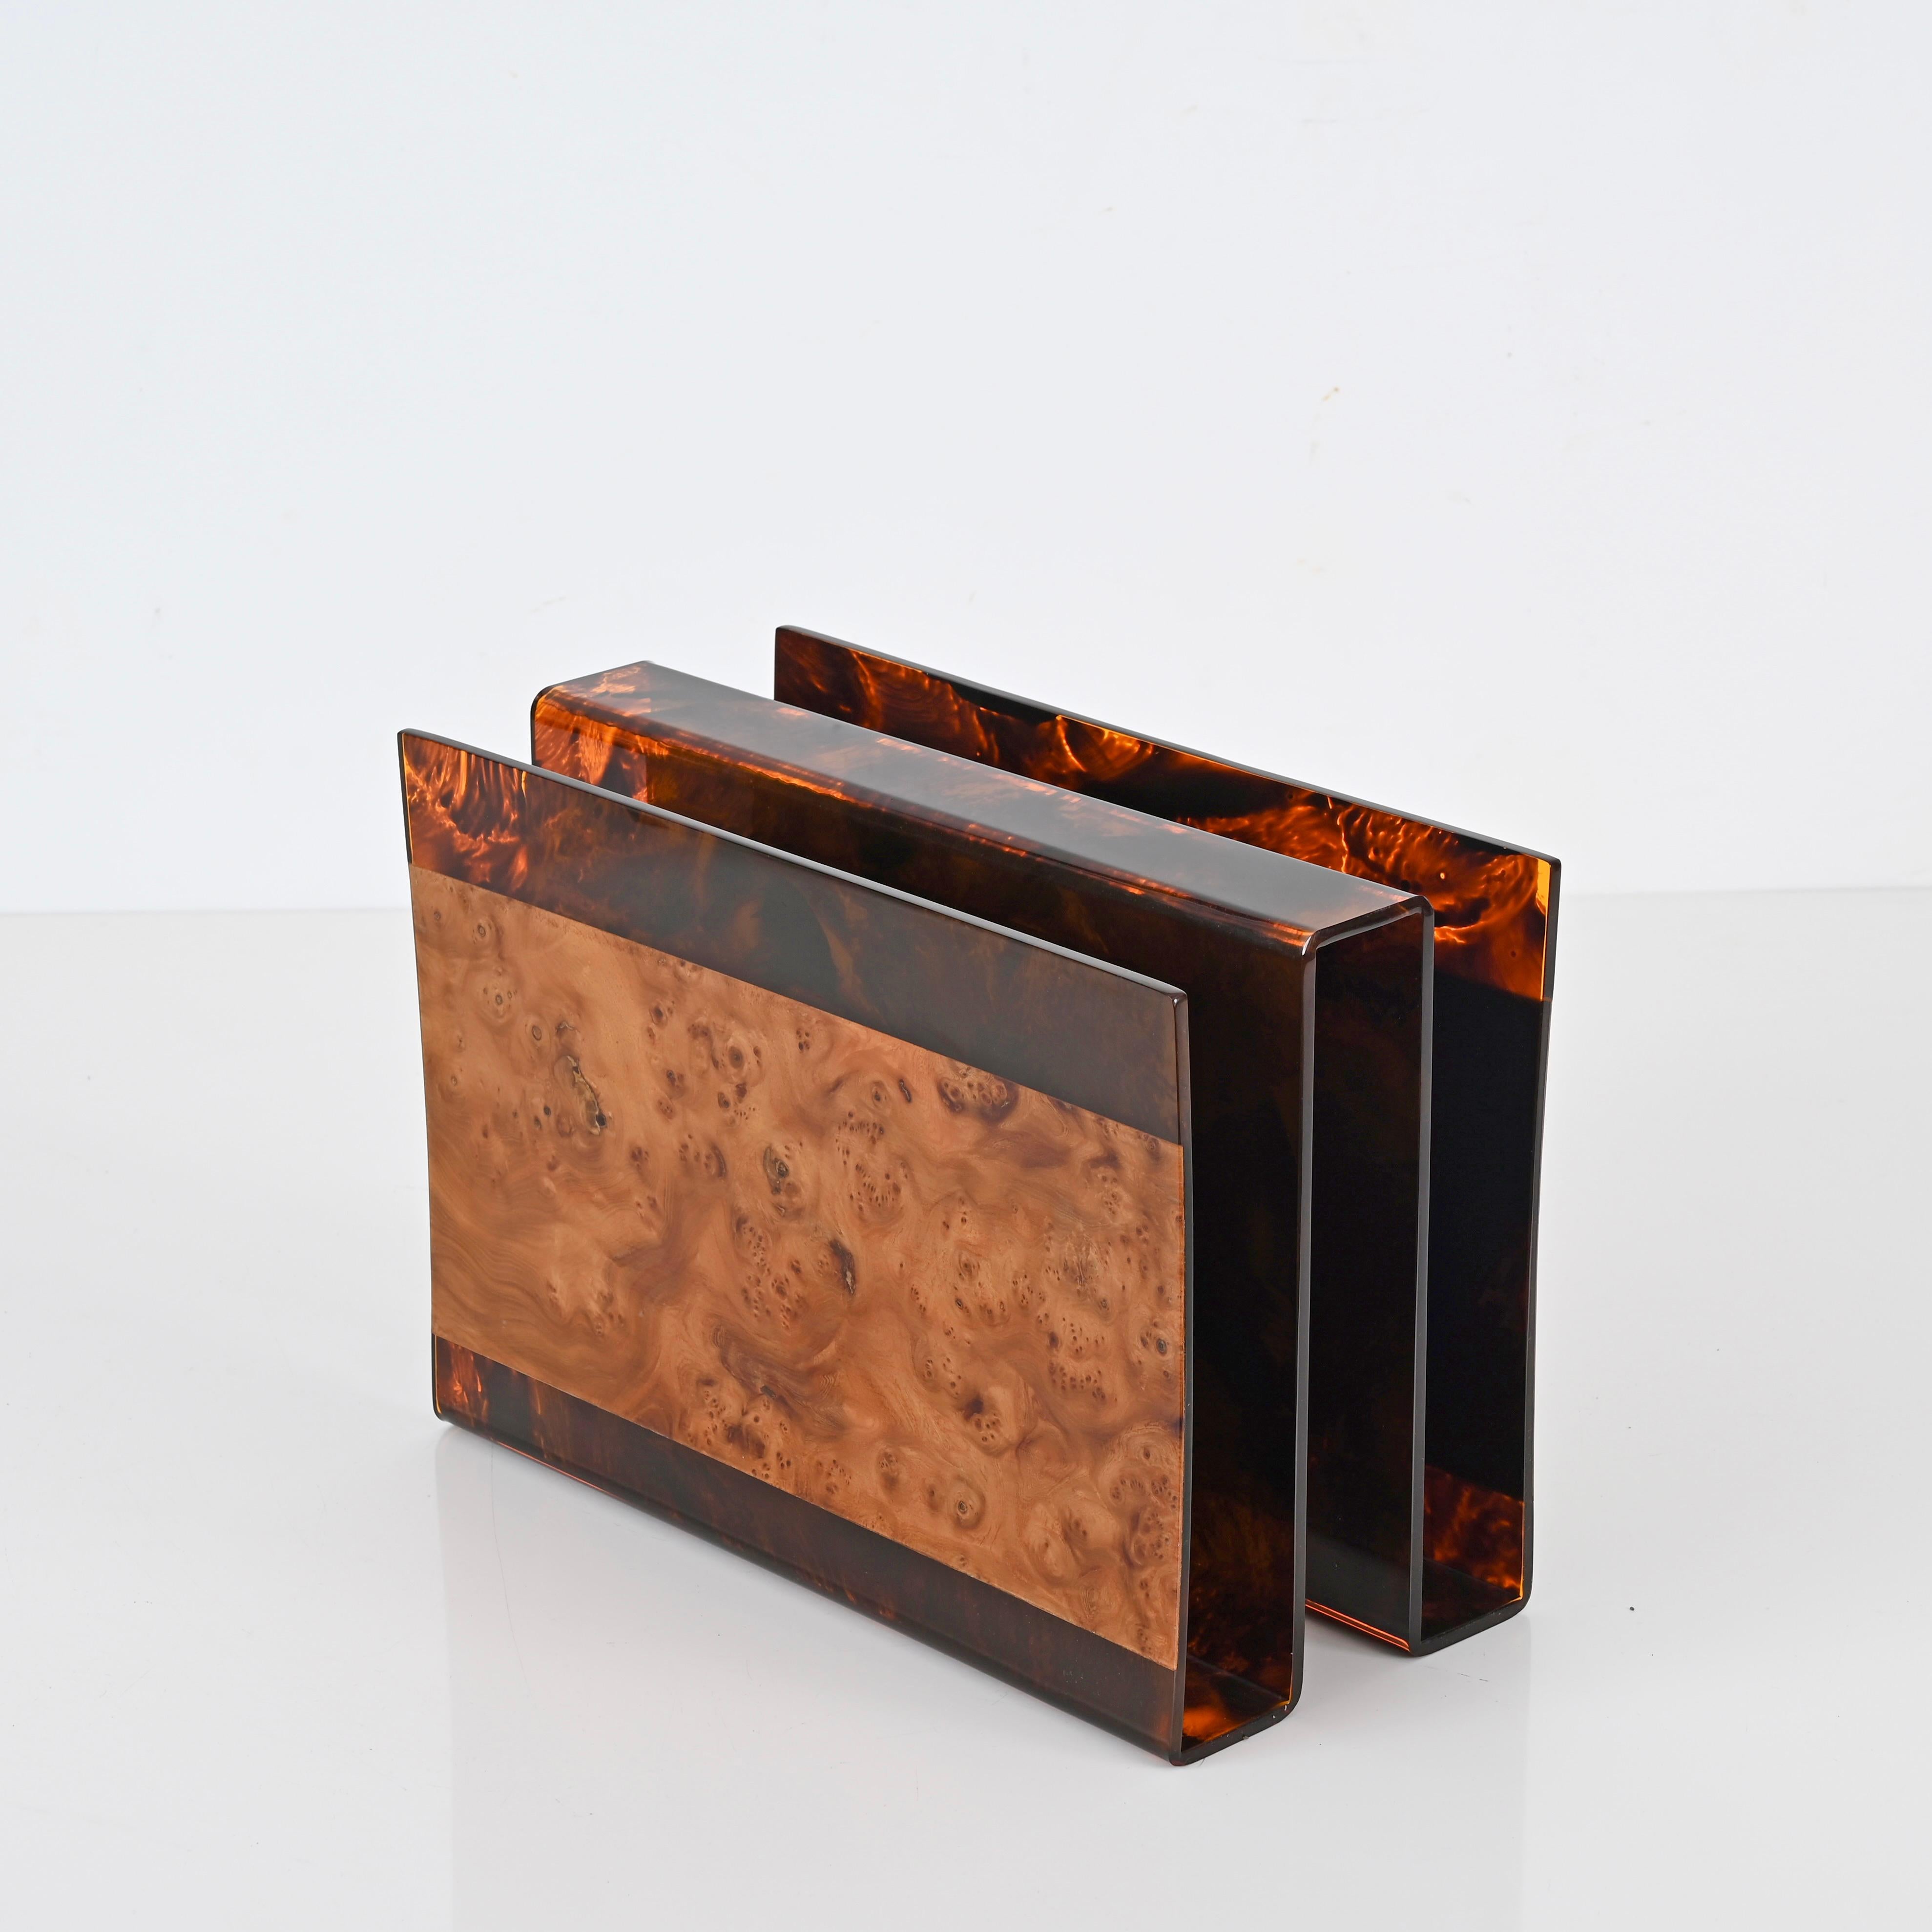 Guzzini Magazine Rack in Tortoiseshell Lucite and Briar, Italy 1970s For Sale 1